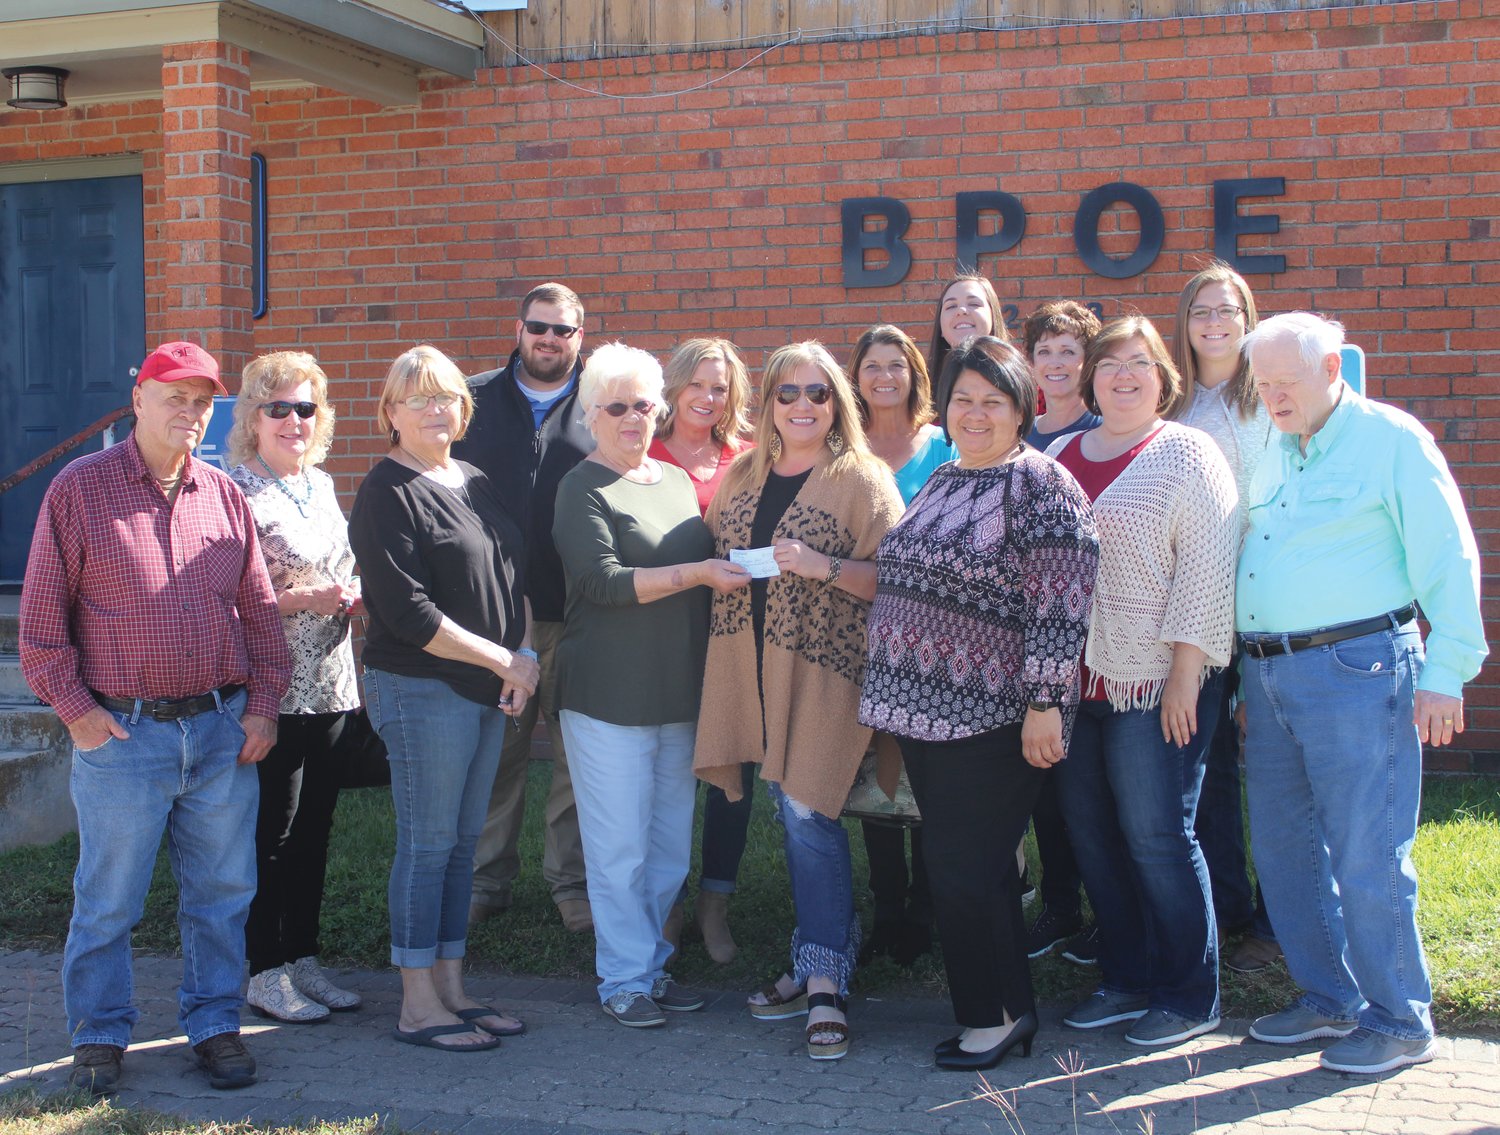 shown presenting a check in the amount of $1500 to Norma’s House are Joe Kotwig, Mary Ann Day, Lori Behlen and Shirley Breitschopf. Receiving check on behalf of Norma’s House are Kim Davis, Joe Pat Nance, Debbie Fougerat, Kathy Schumacher and Charlie Mills, Judy Parks, Tanya Torres, Ashley Schurig and Barbara Stevenson and Deane Parsley-Novosad.